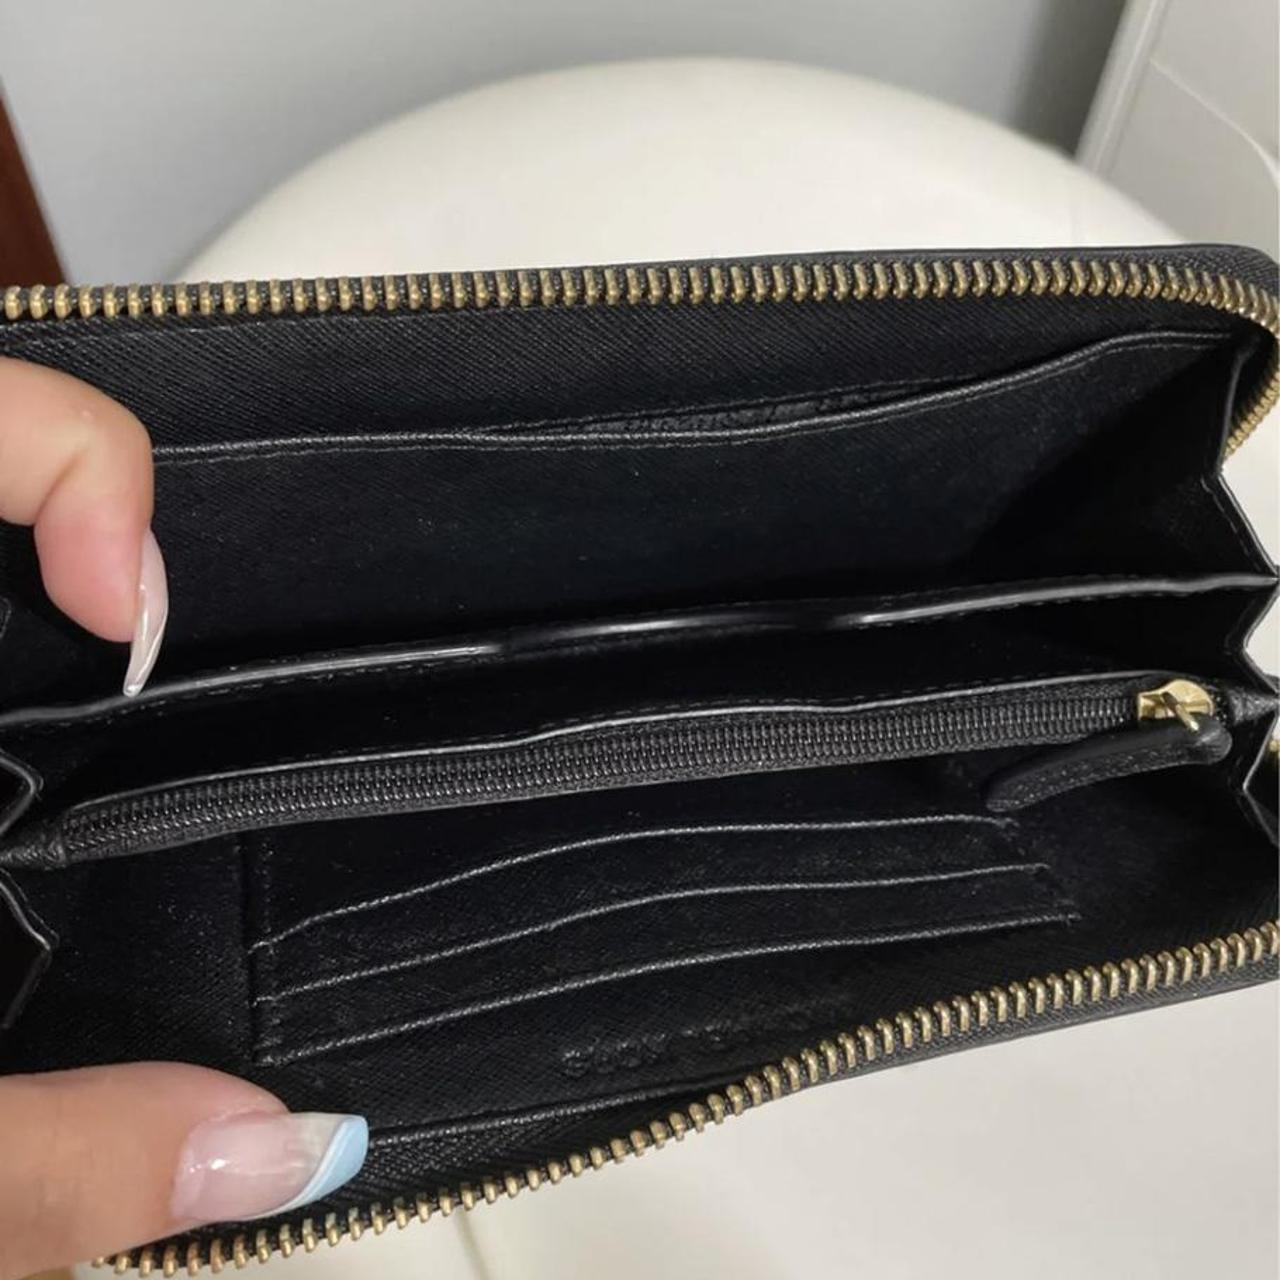 Product Image 3 - Michael kors black wallet

TRYING TO